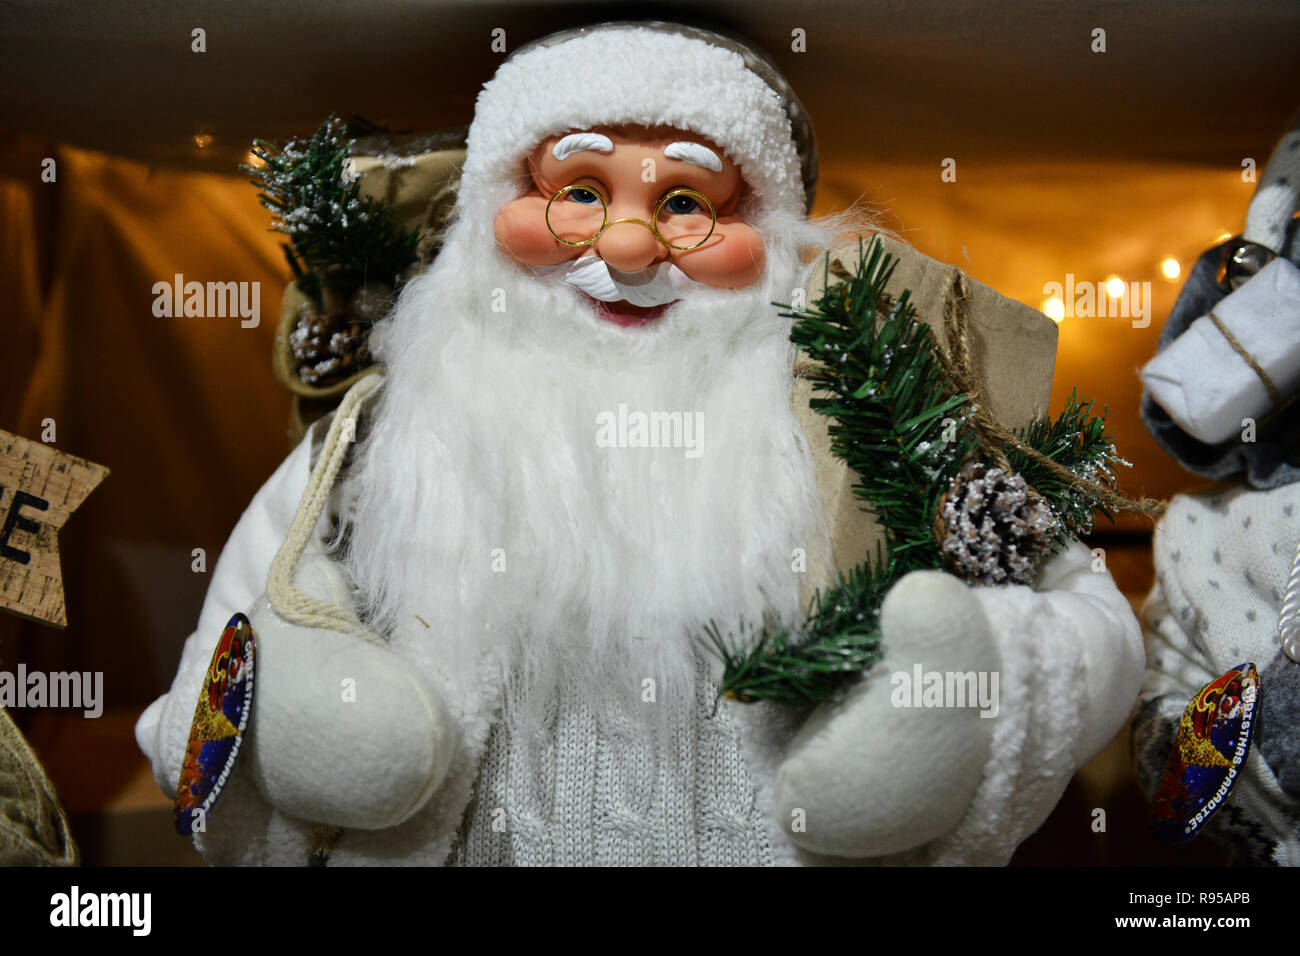 Portrait of a Santa Claus / Father Christmas mannequin exhibited at the Christmas market in Leipzig, Germany. Stock Photo